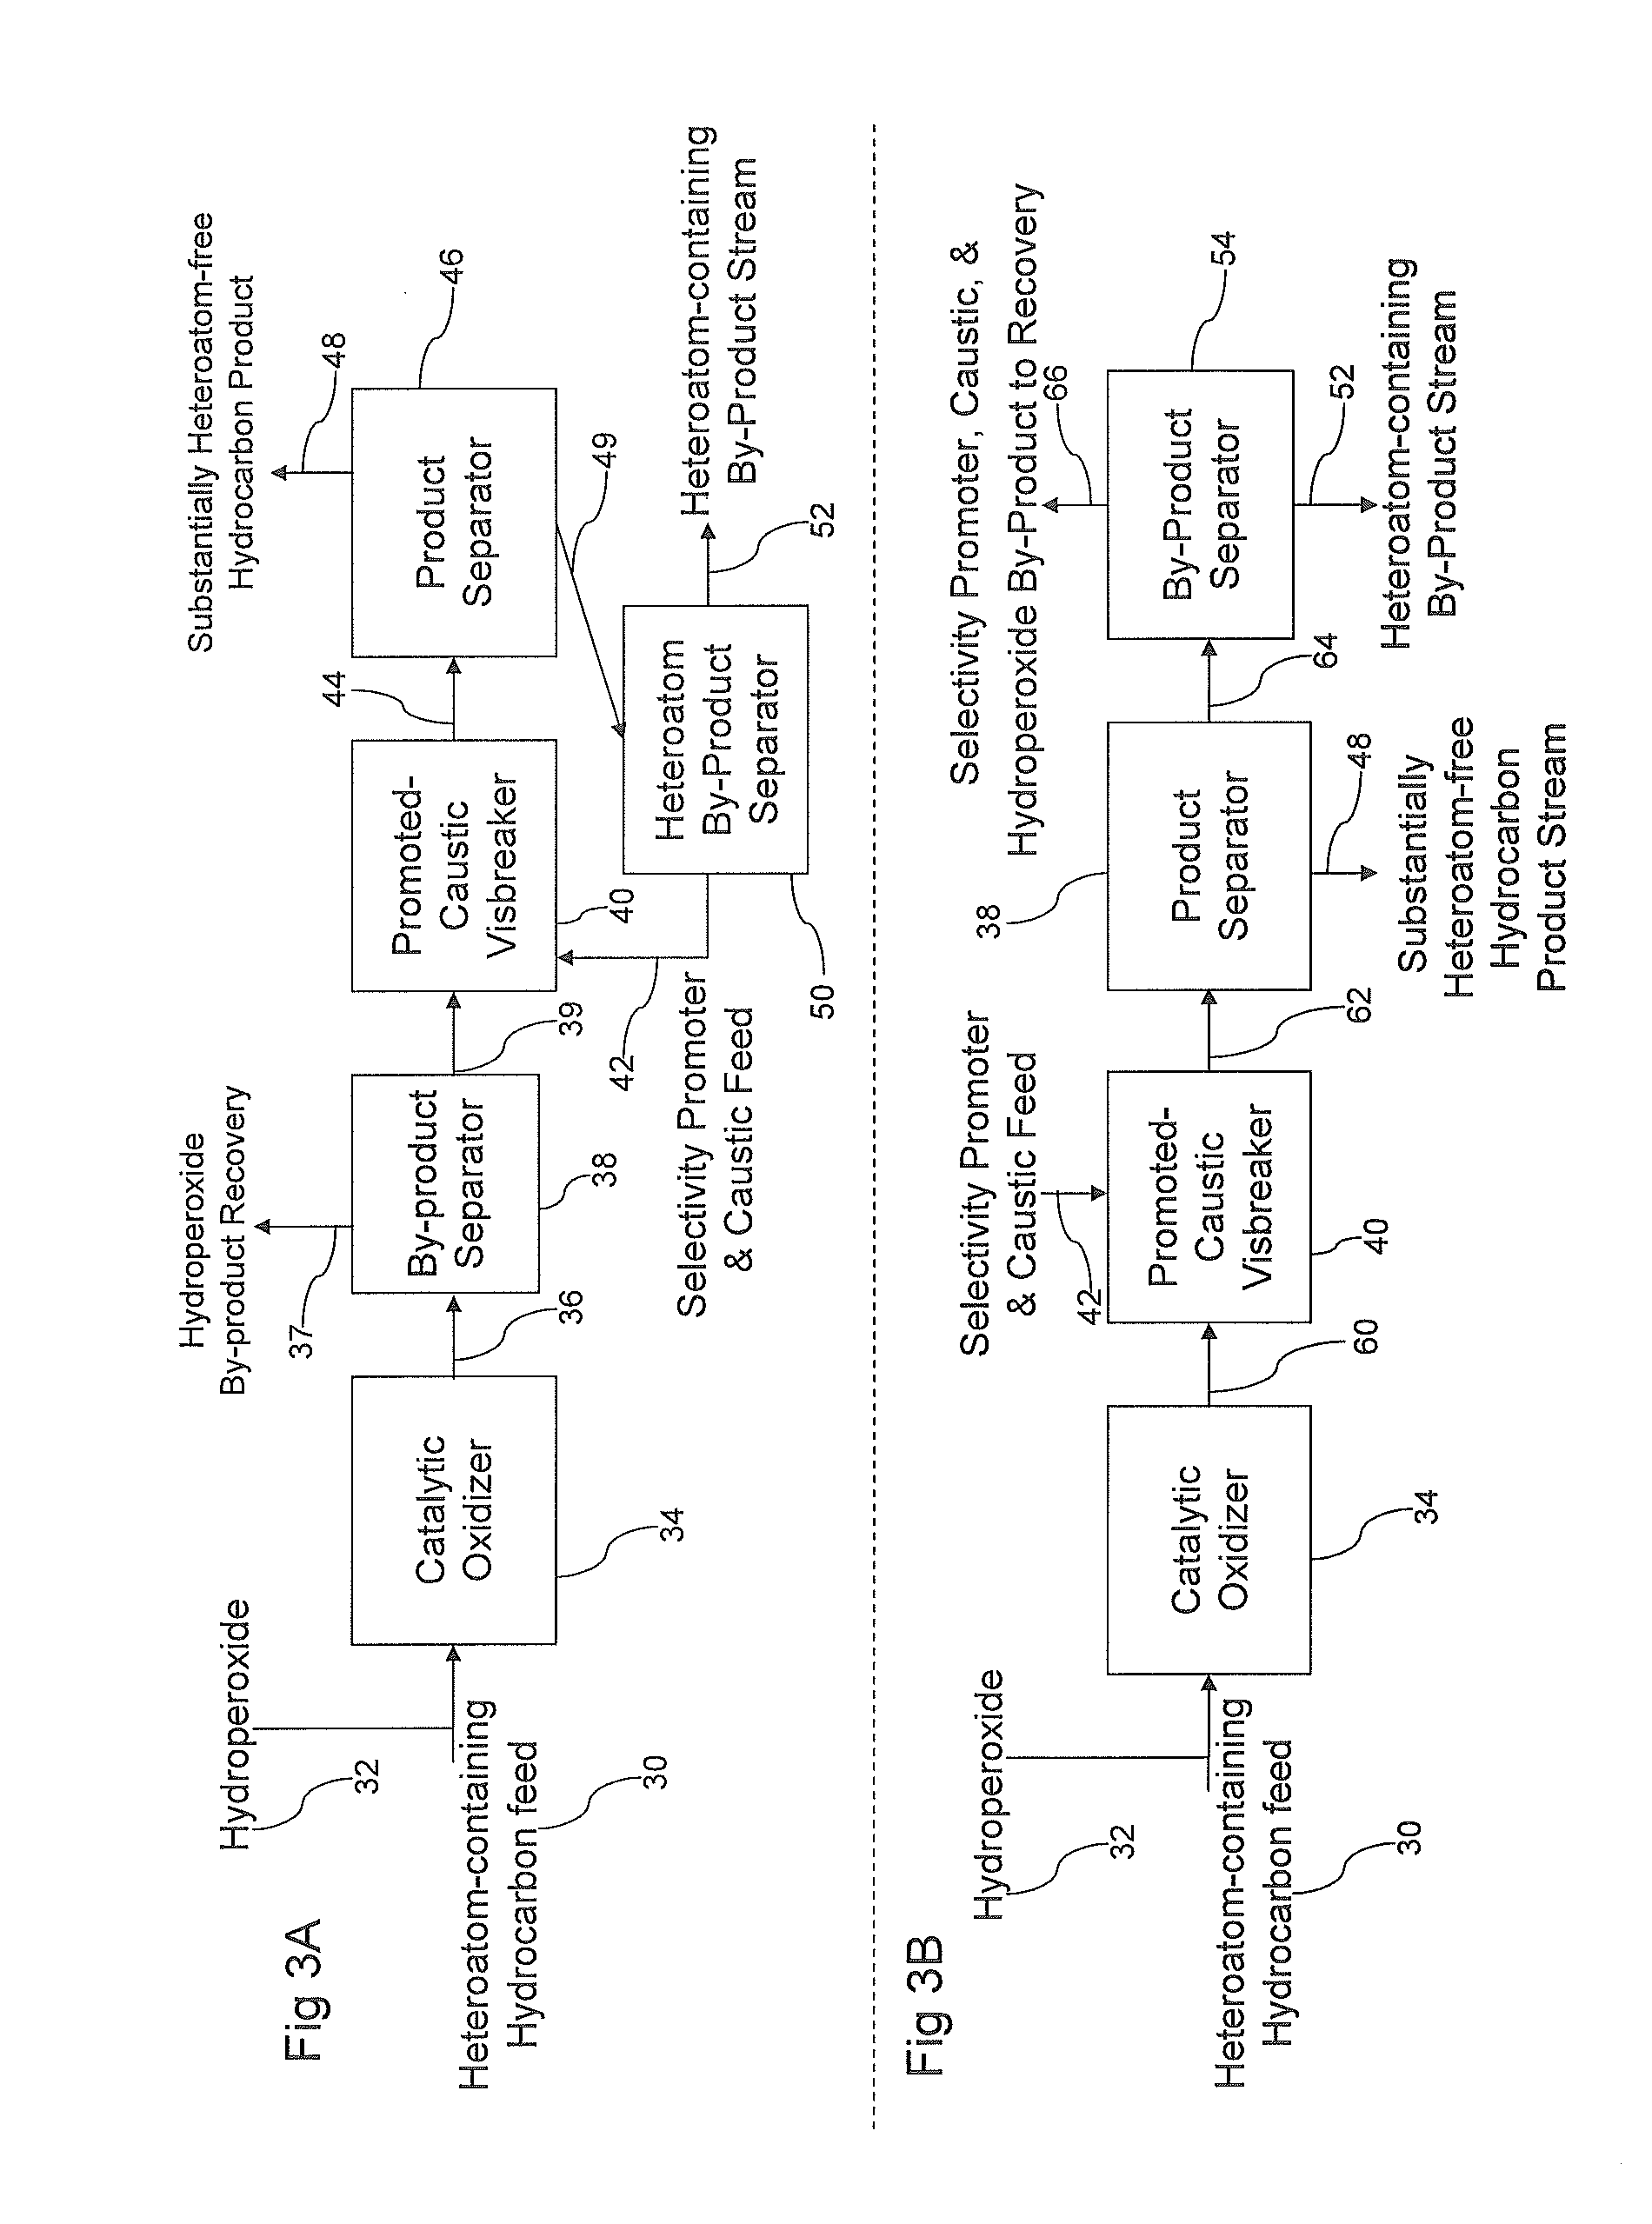 Methods for upgrading of contaminated hydrocarbon streams